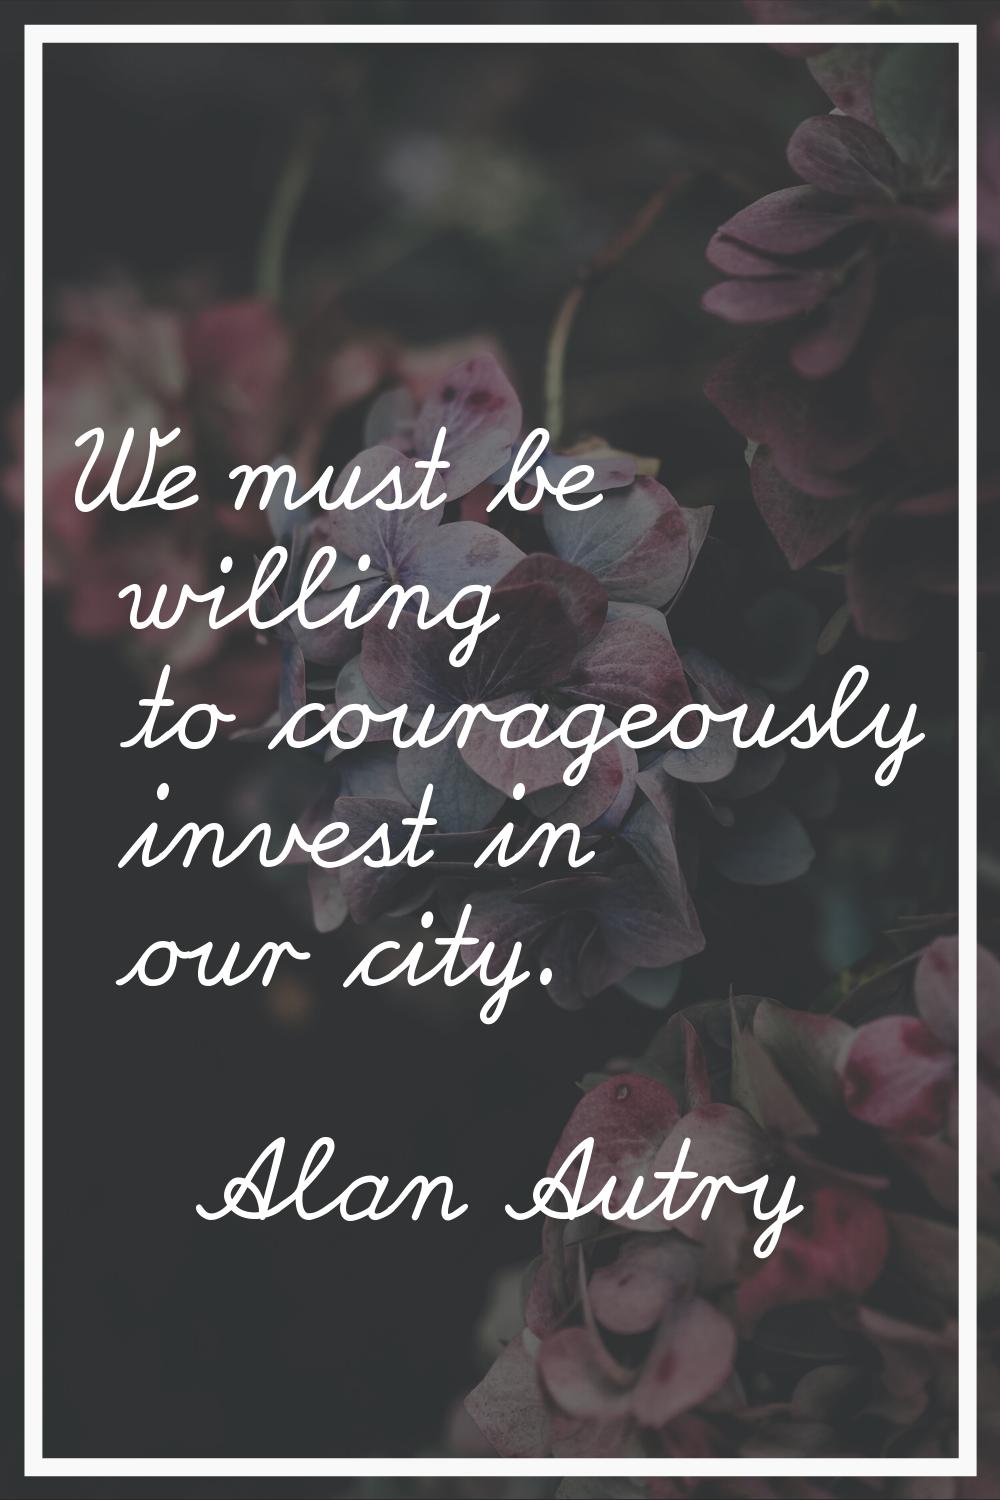 We must be willing to courageously invest in our city.